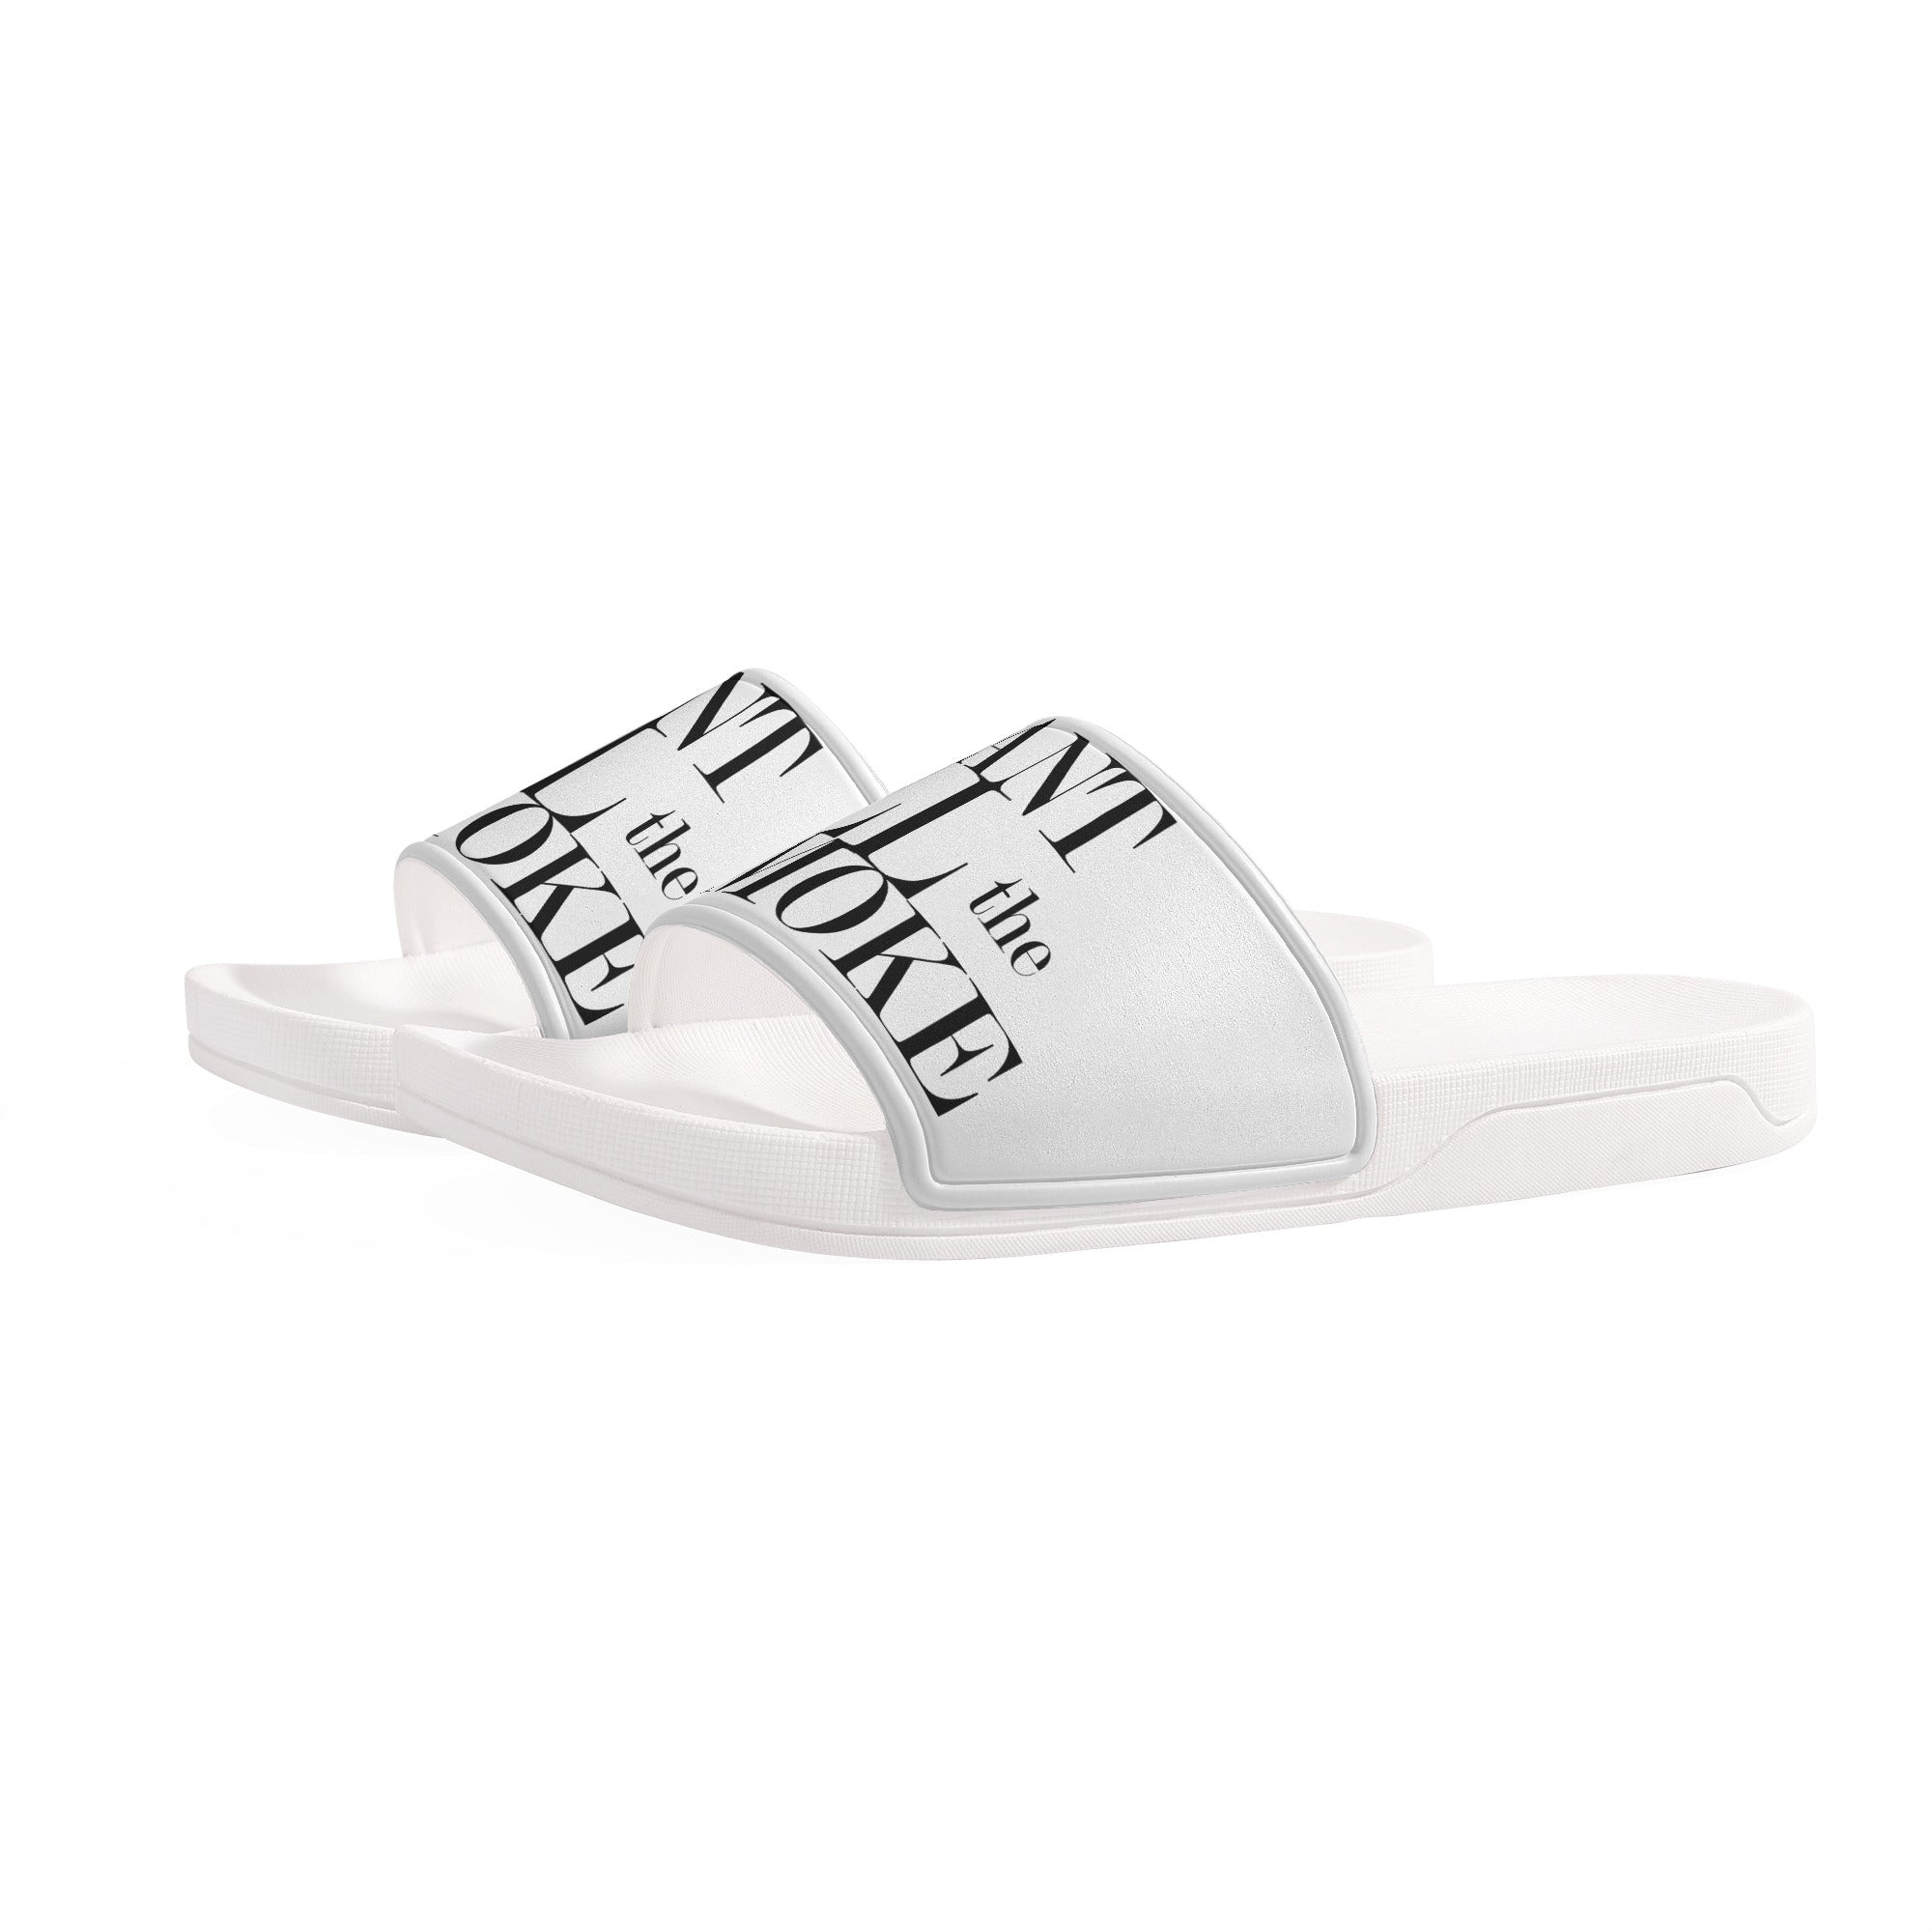 I Want All The Smoke Women's Slide Sandals Shoes